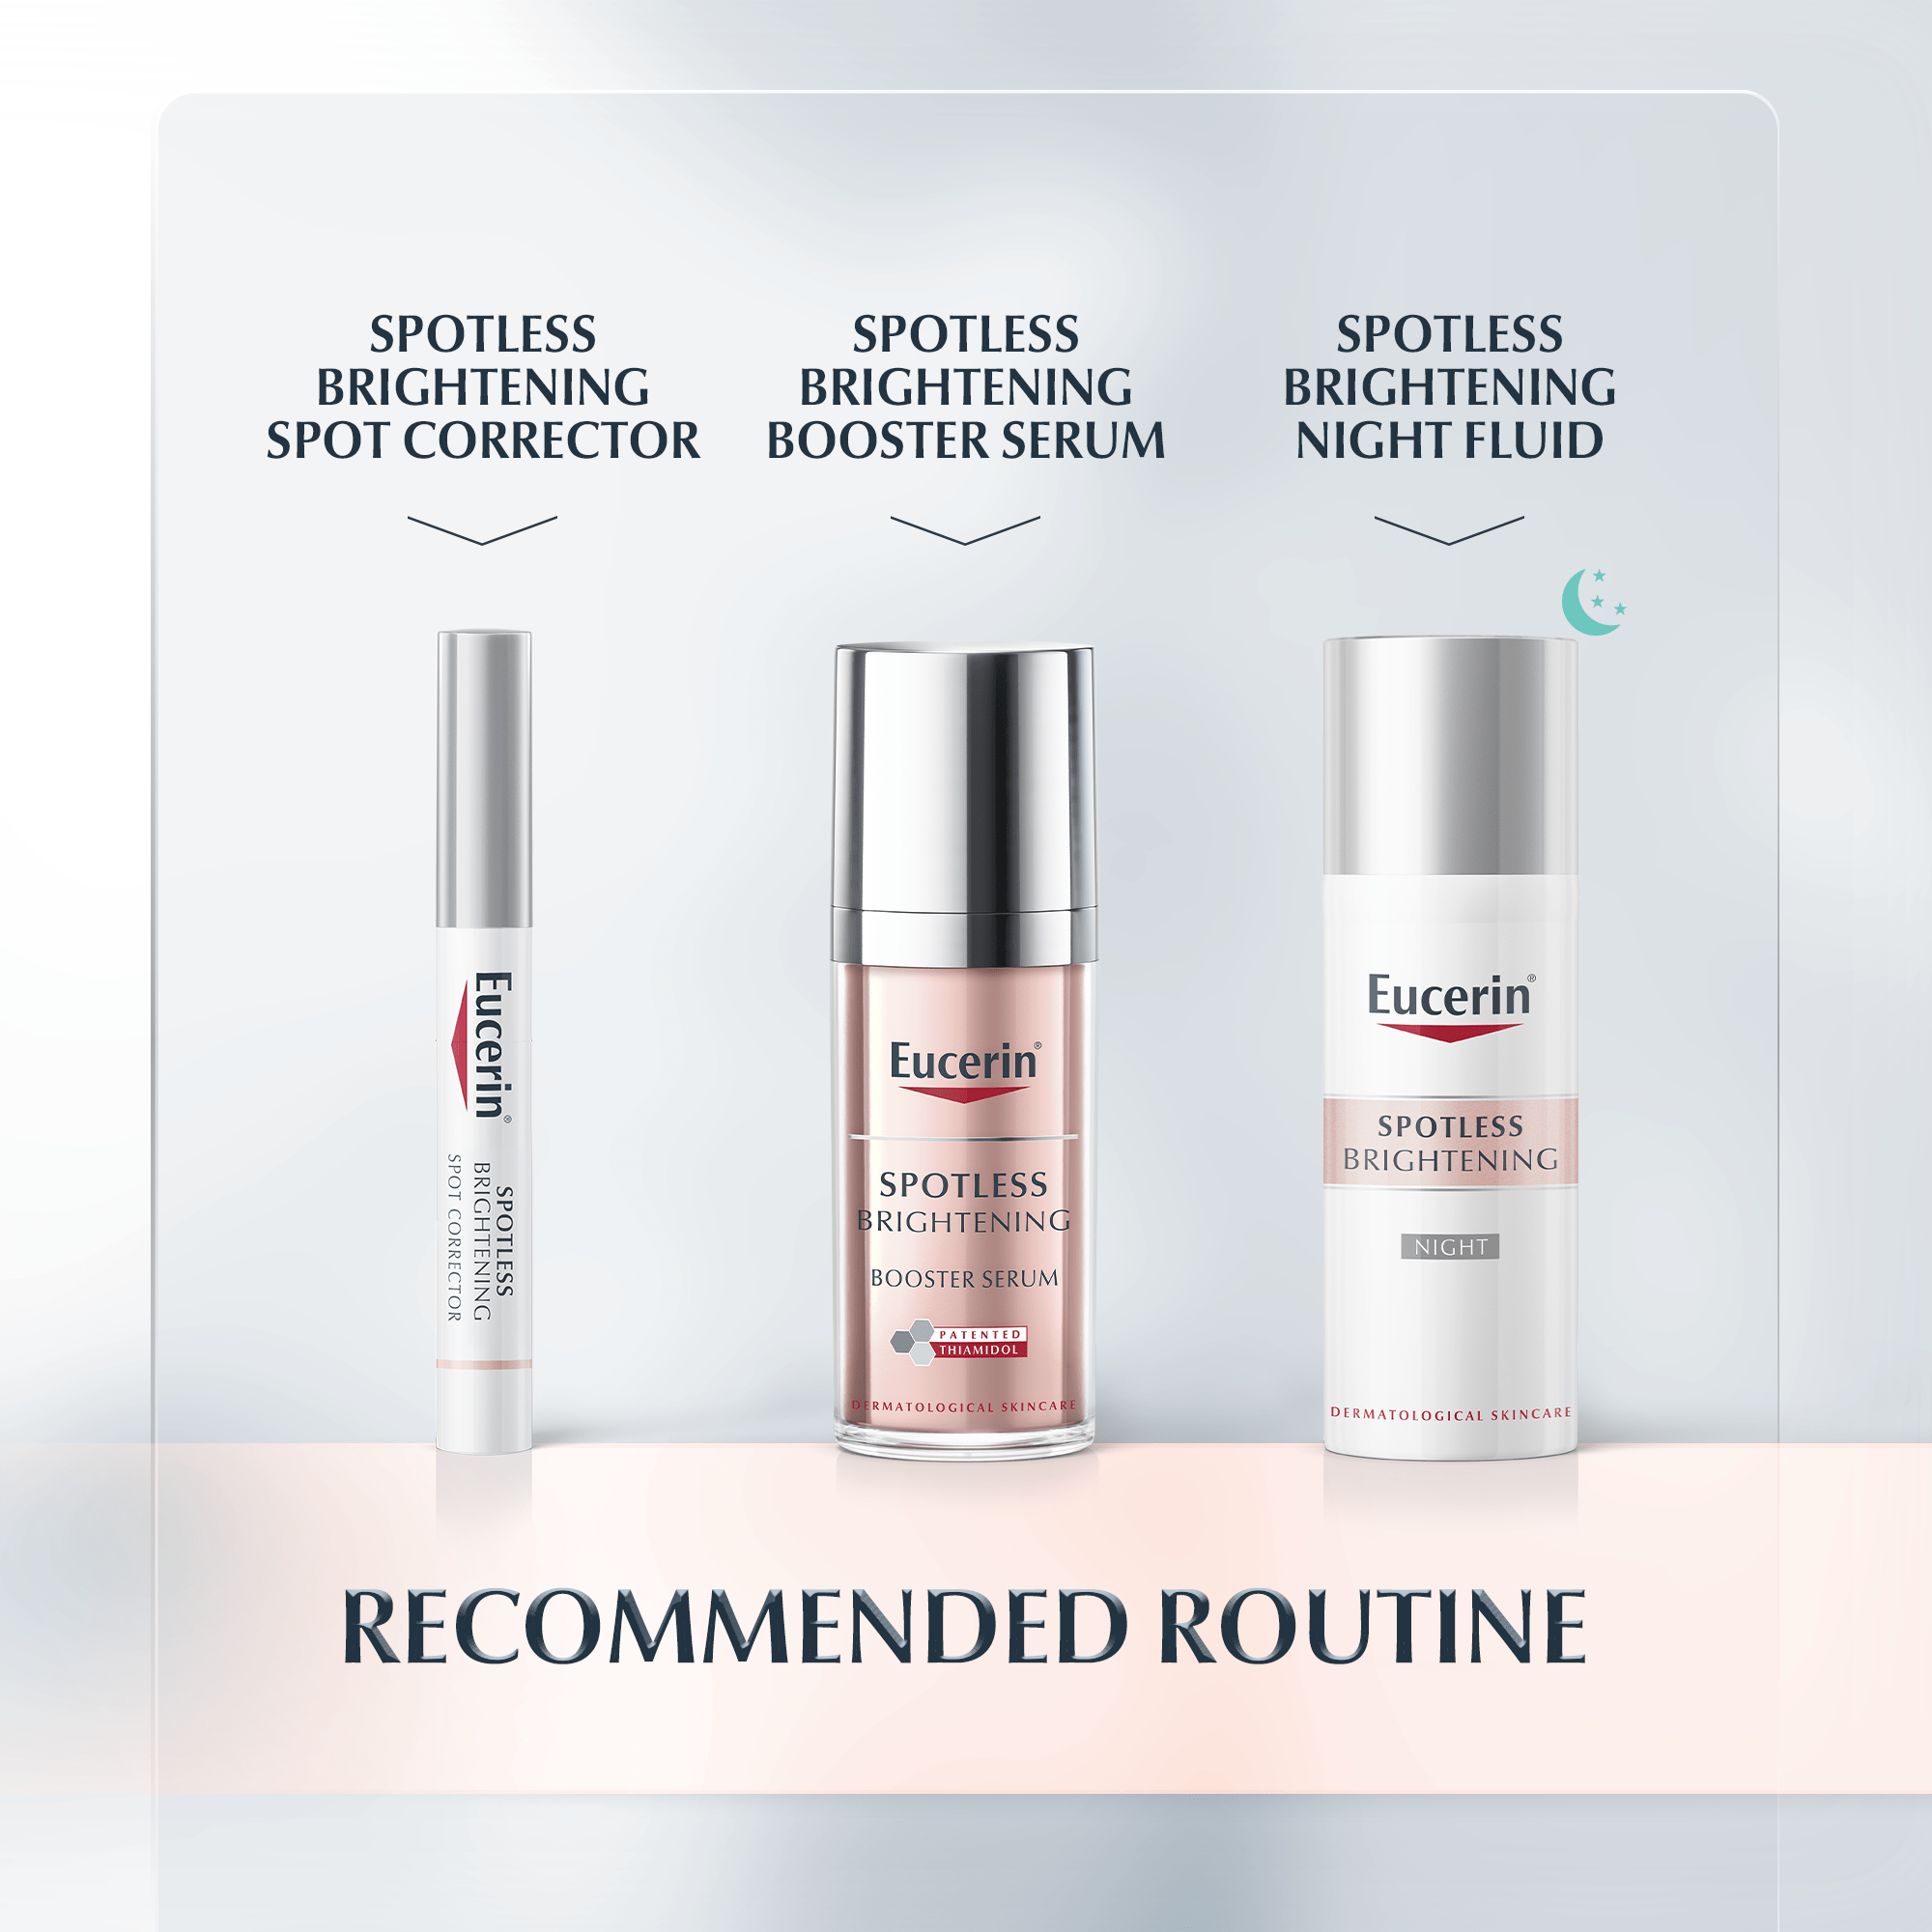 Recommended Routine for Spotless Brightening Day Fluid